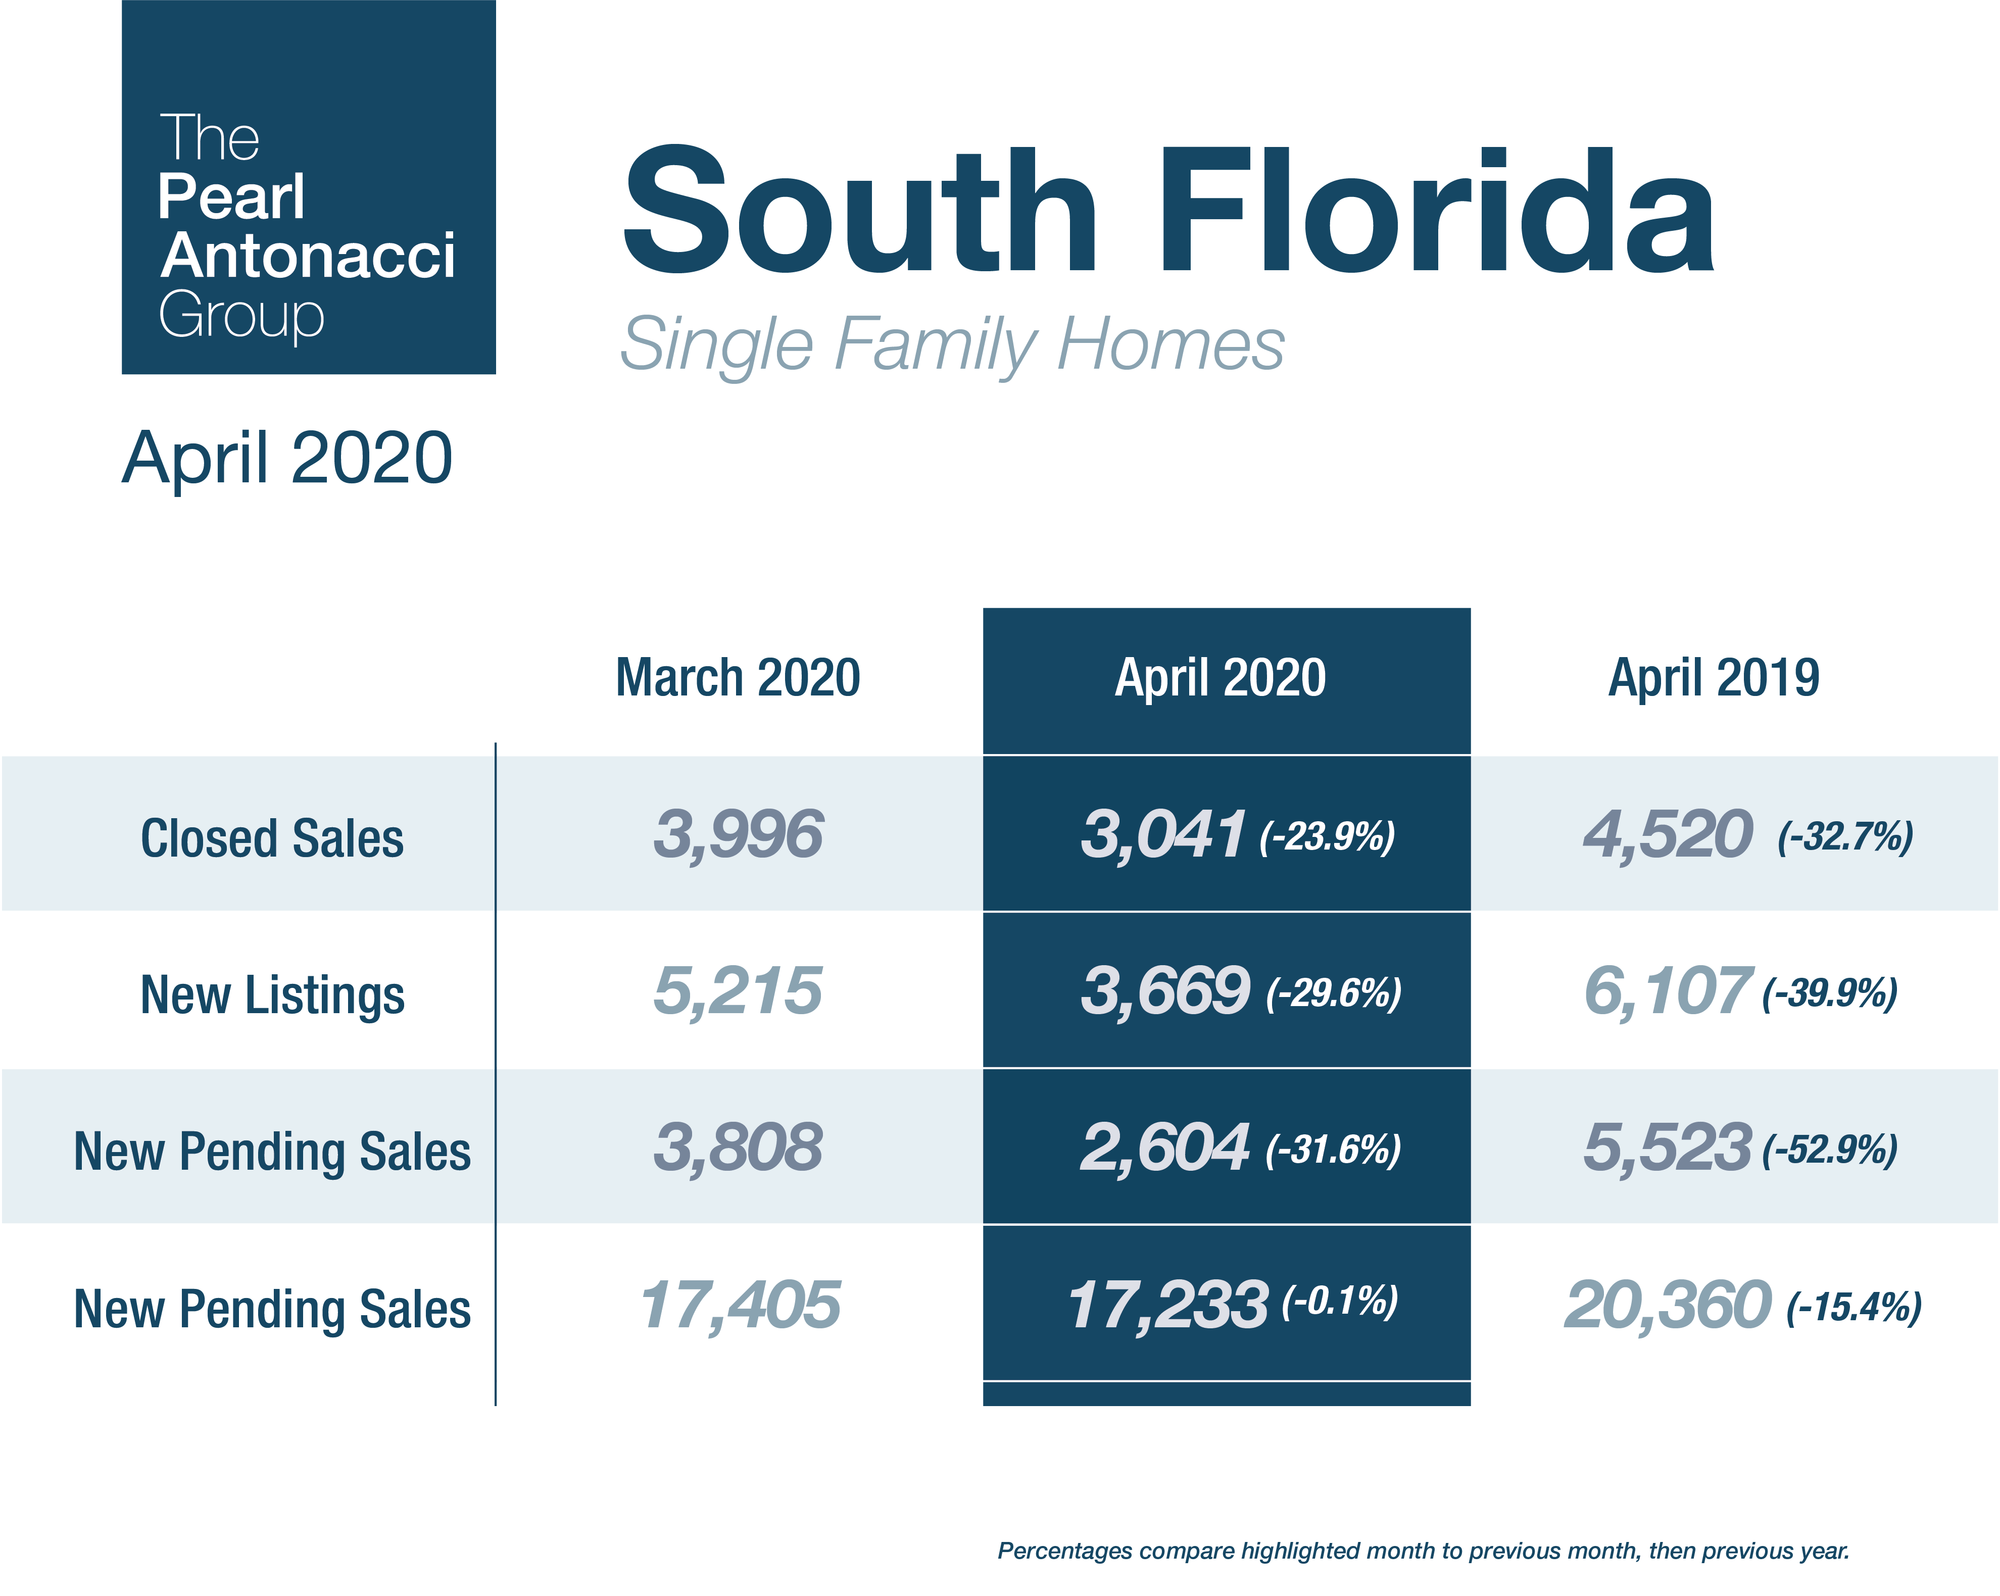 South Florida Single Family Home Sales - Buyer's Market